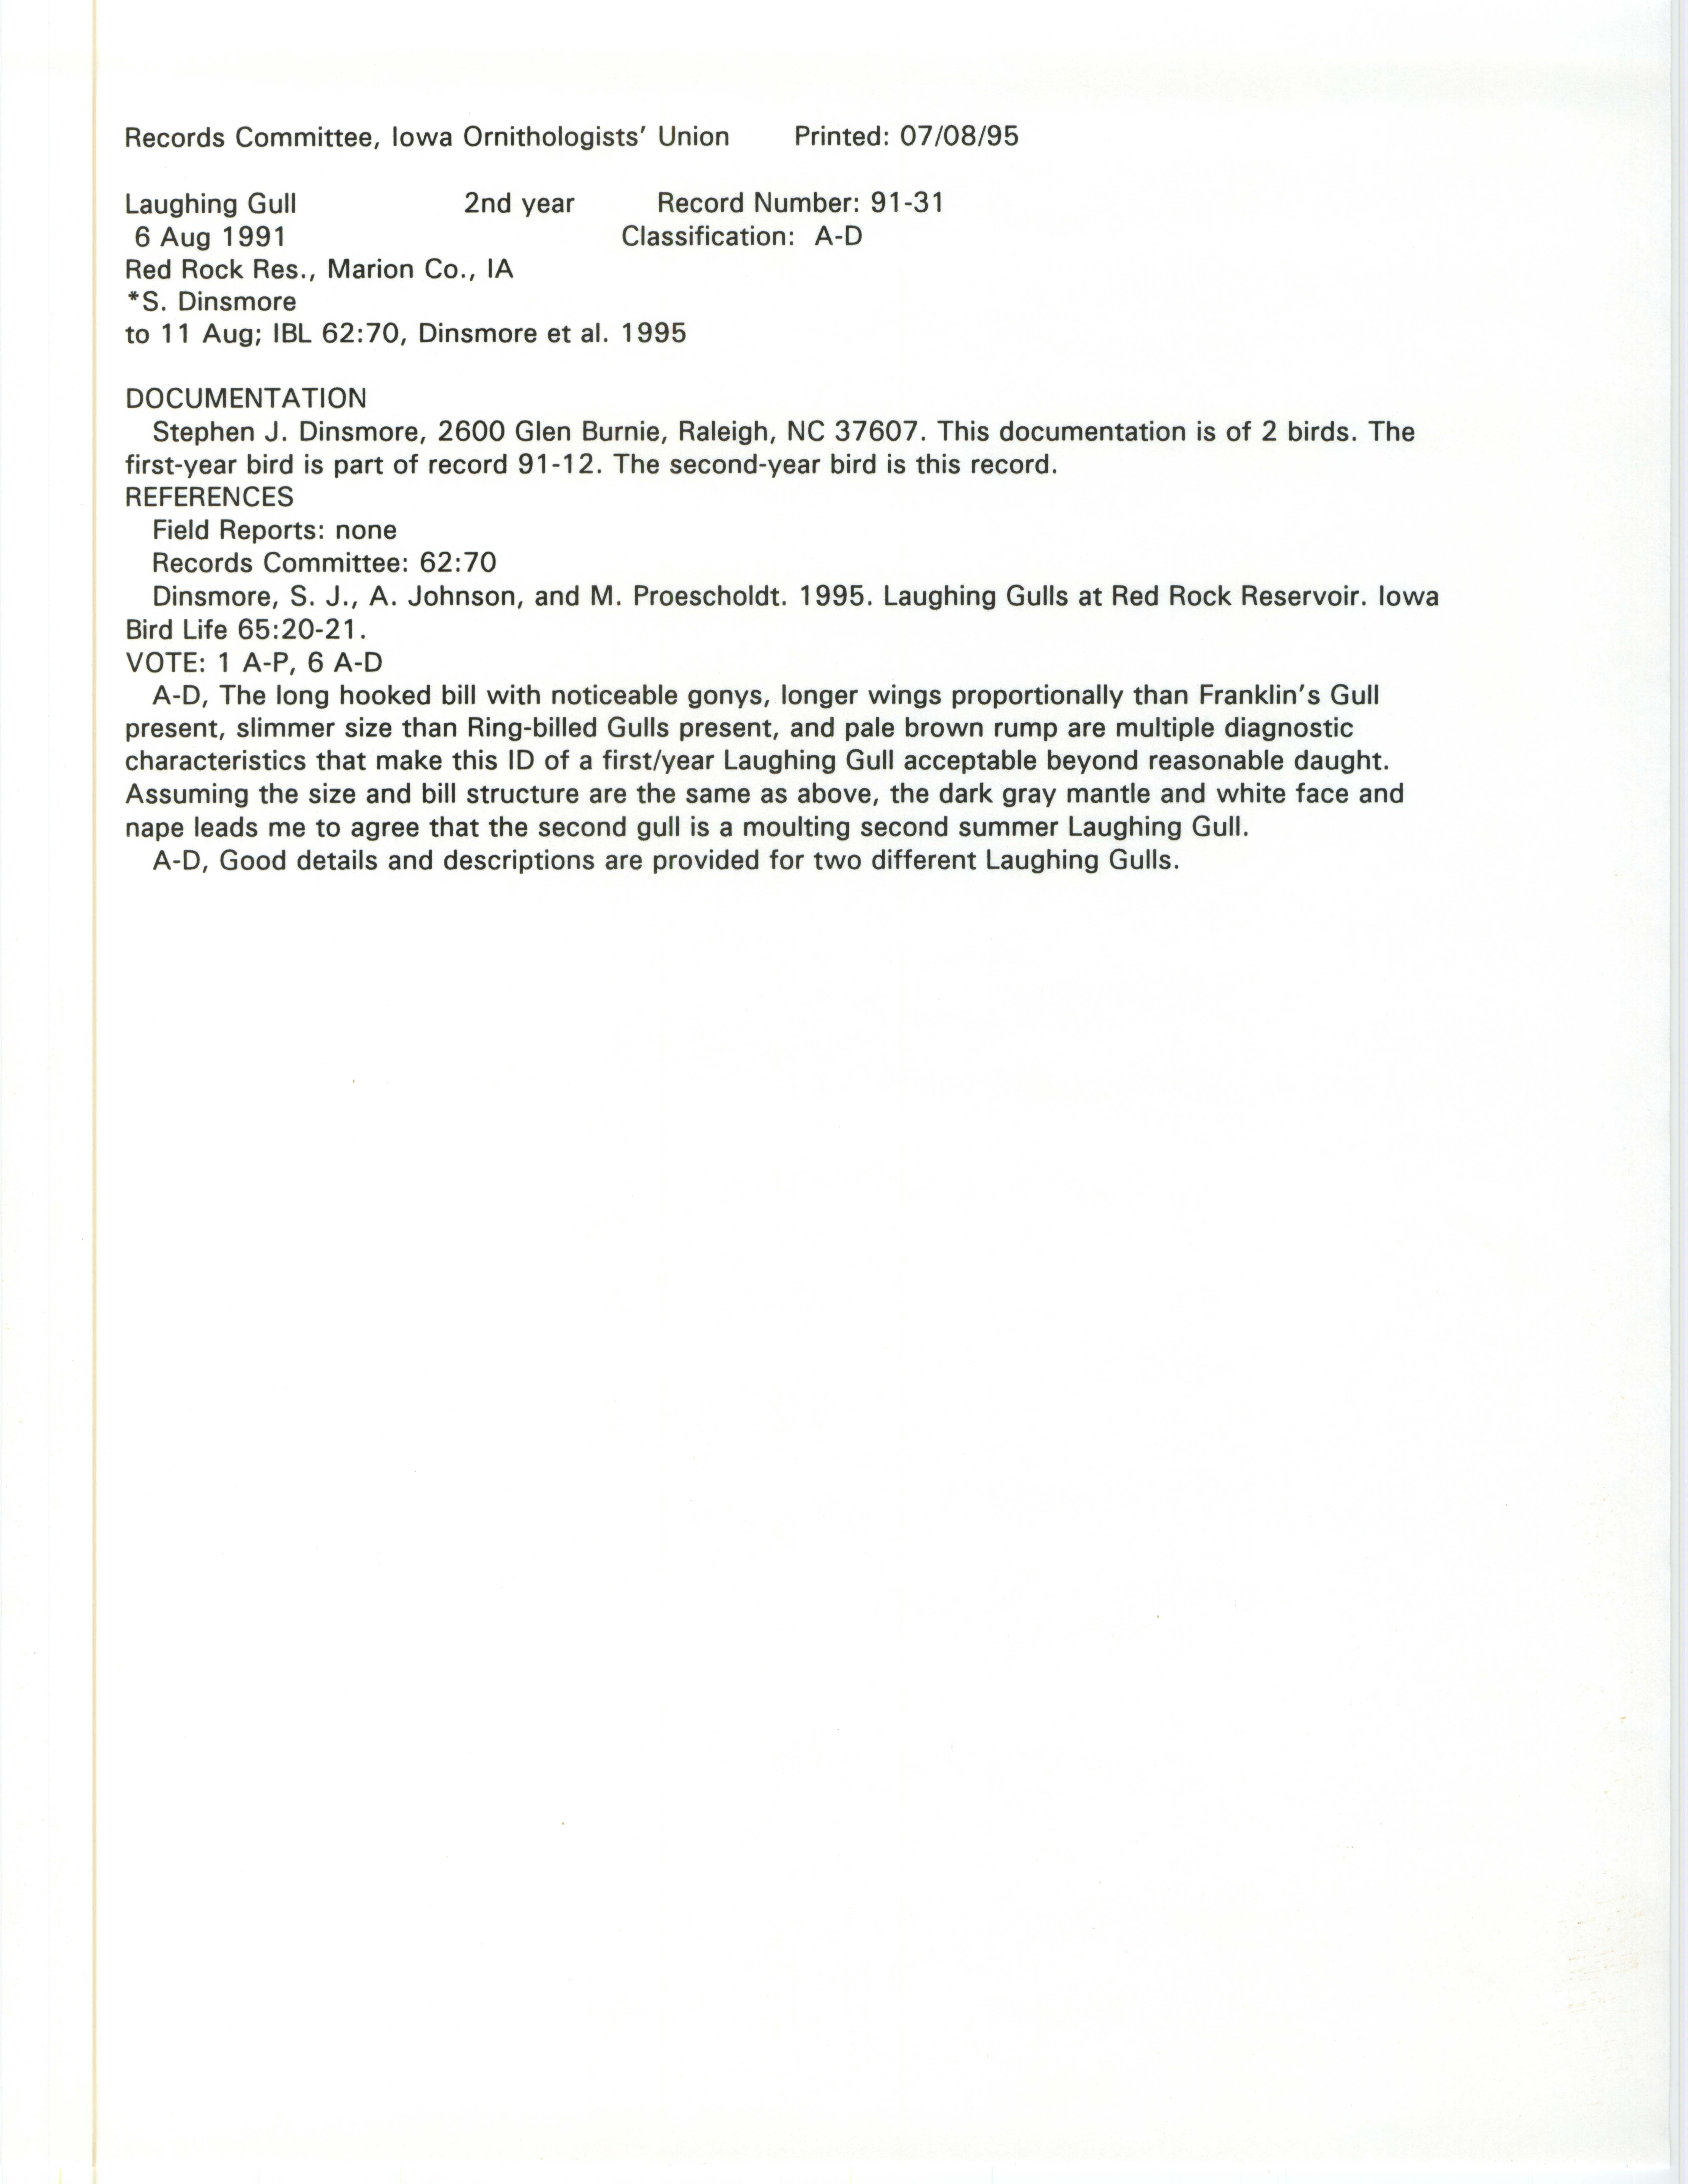 Records Committee review for rare bird sighting of Laughing Gull at Red Rock Reservoir, 1991